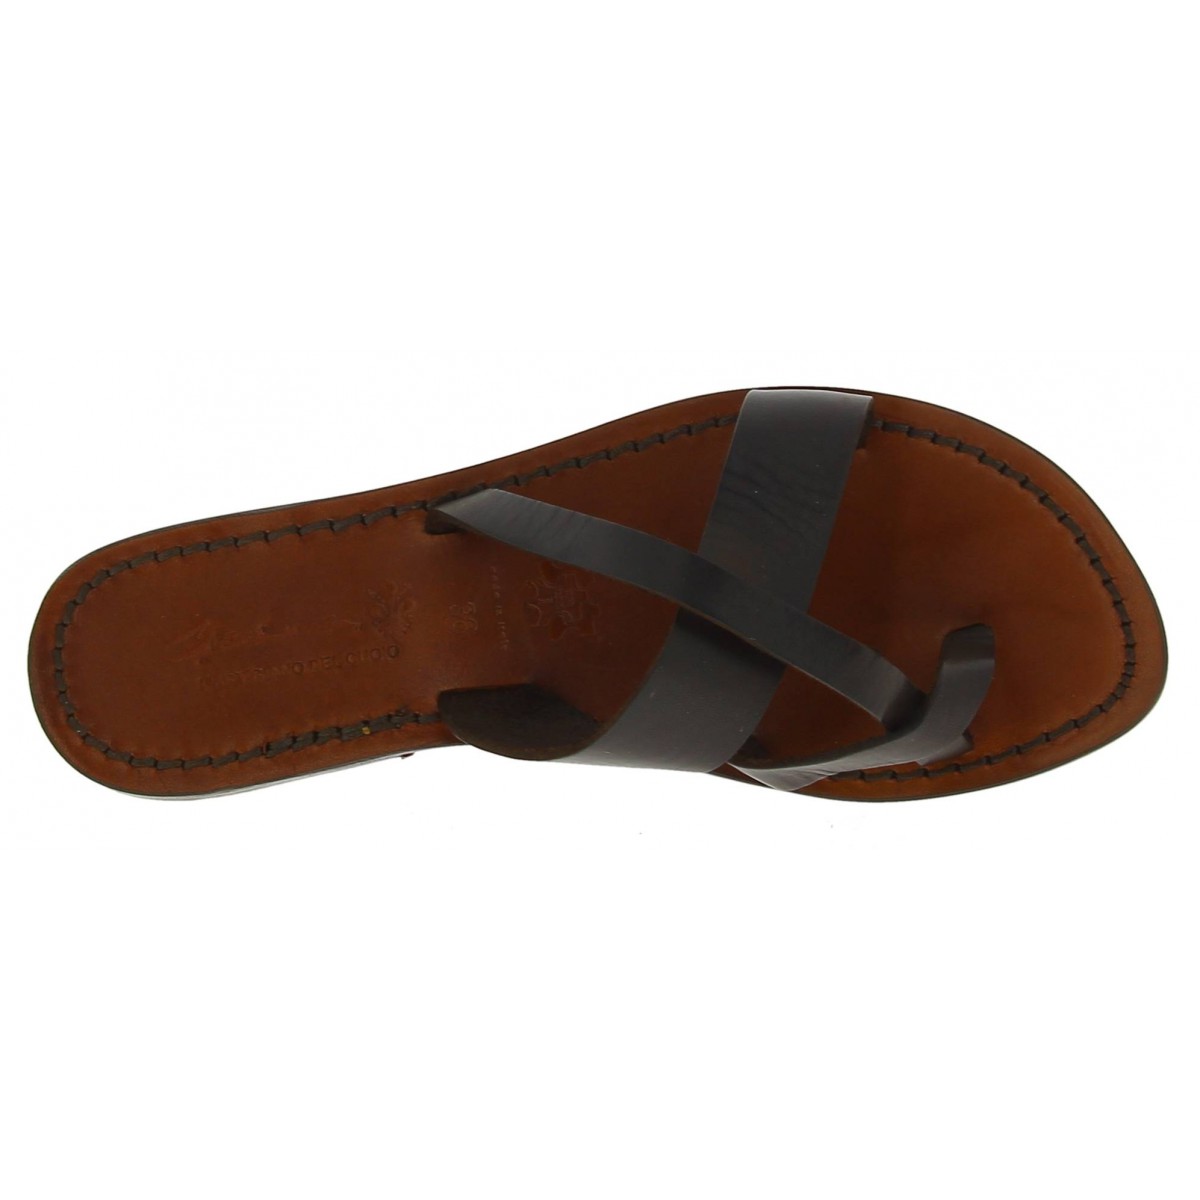 Women's thong sandals Handmade in Italy in dark brown calf leather ...